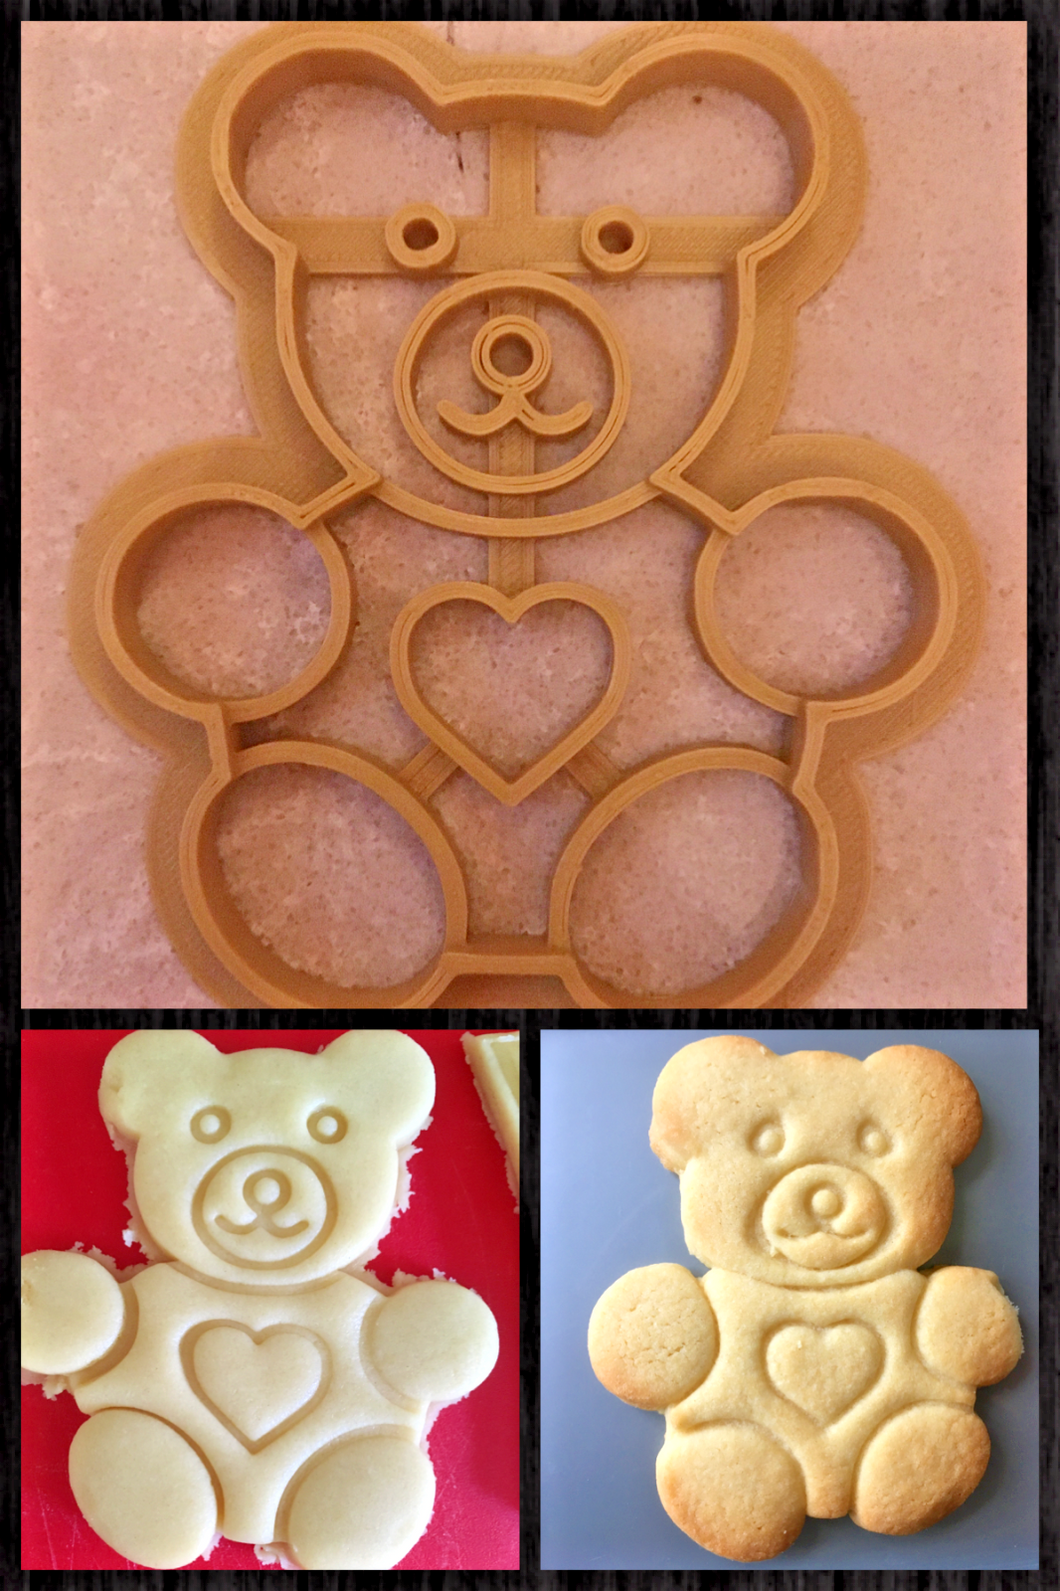 Teddy Bear 3D Printed Cookie Cutter Stamp Baking Biscuit Shape Tool